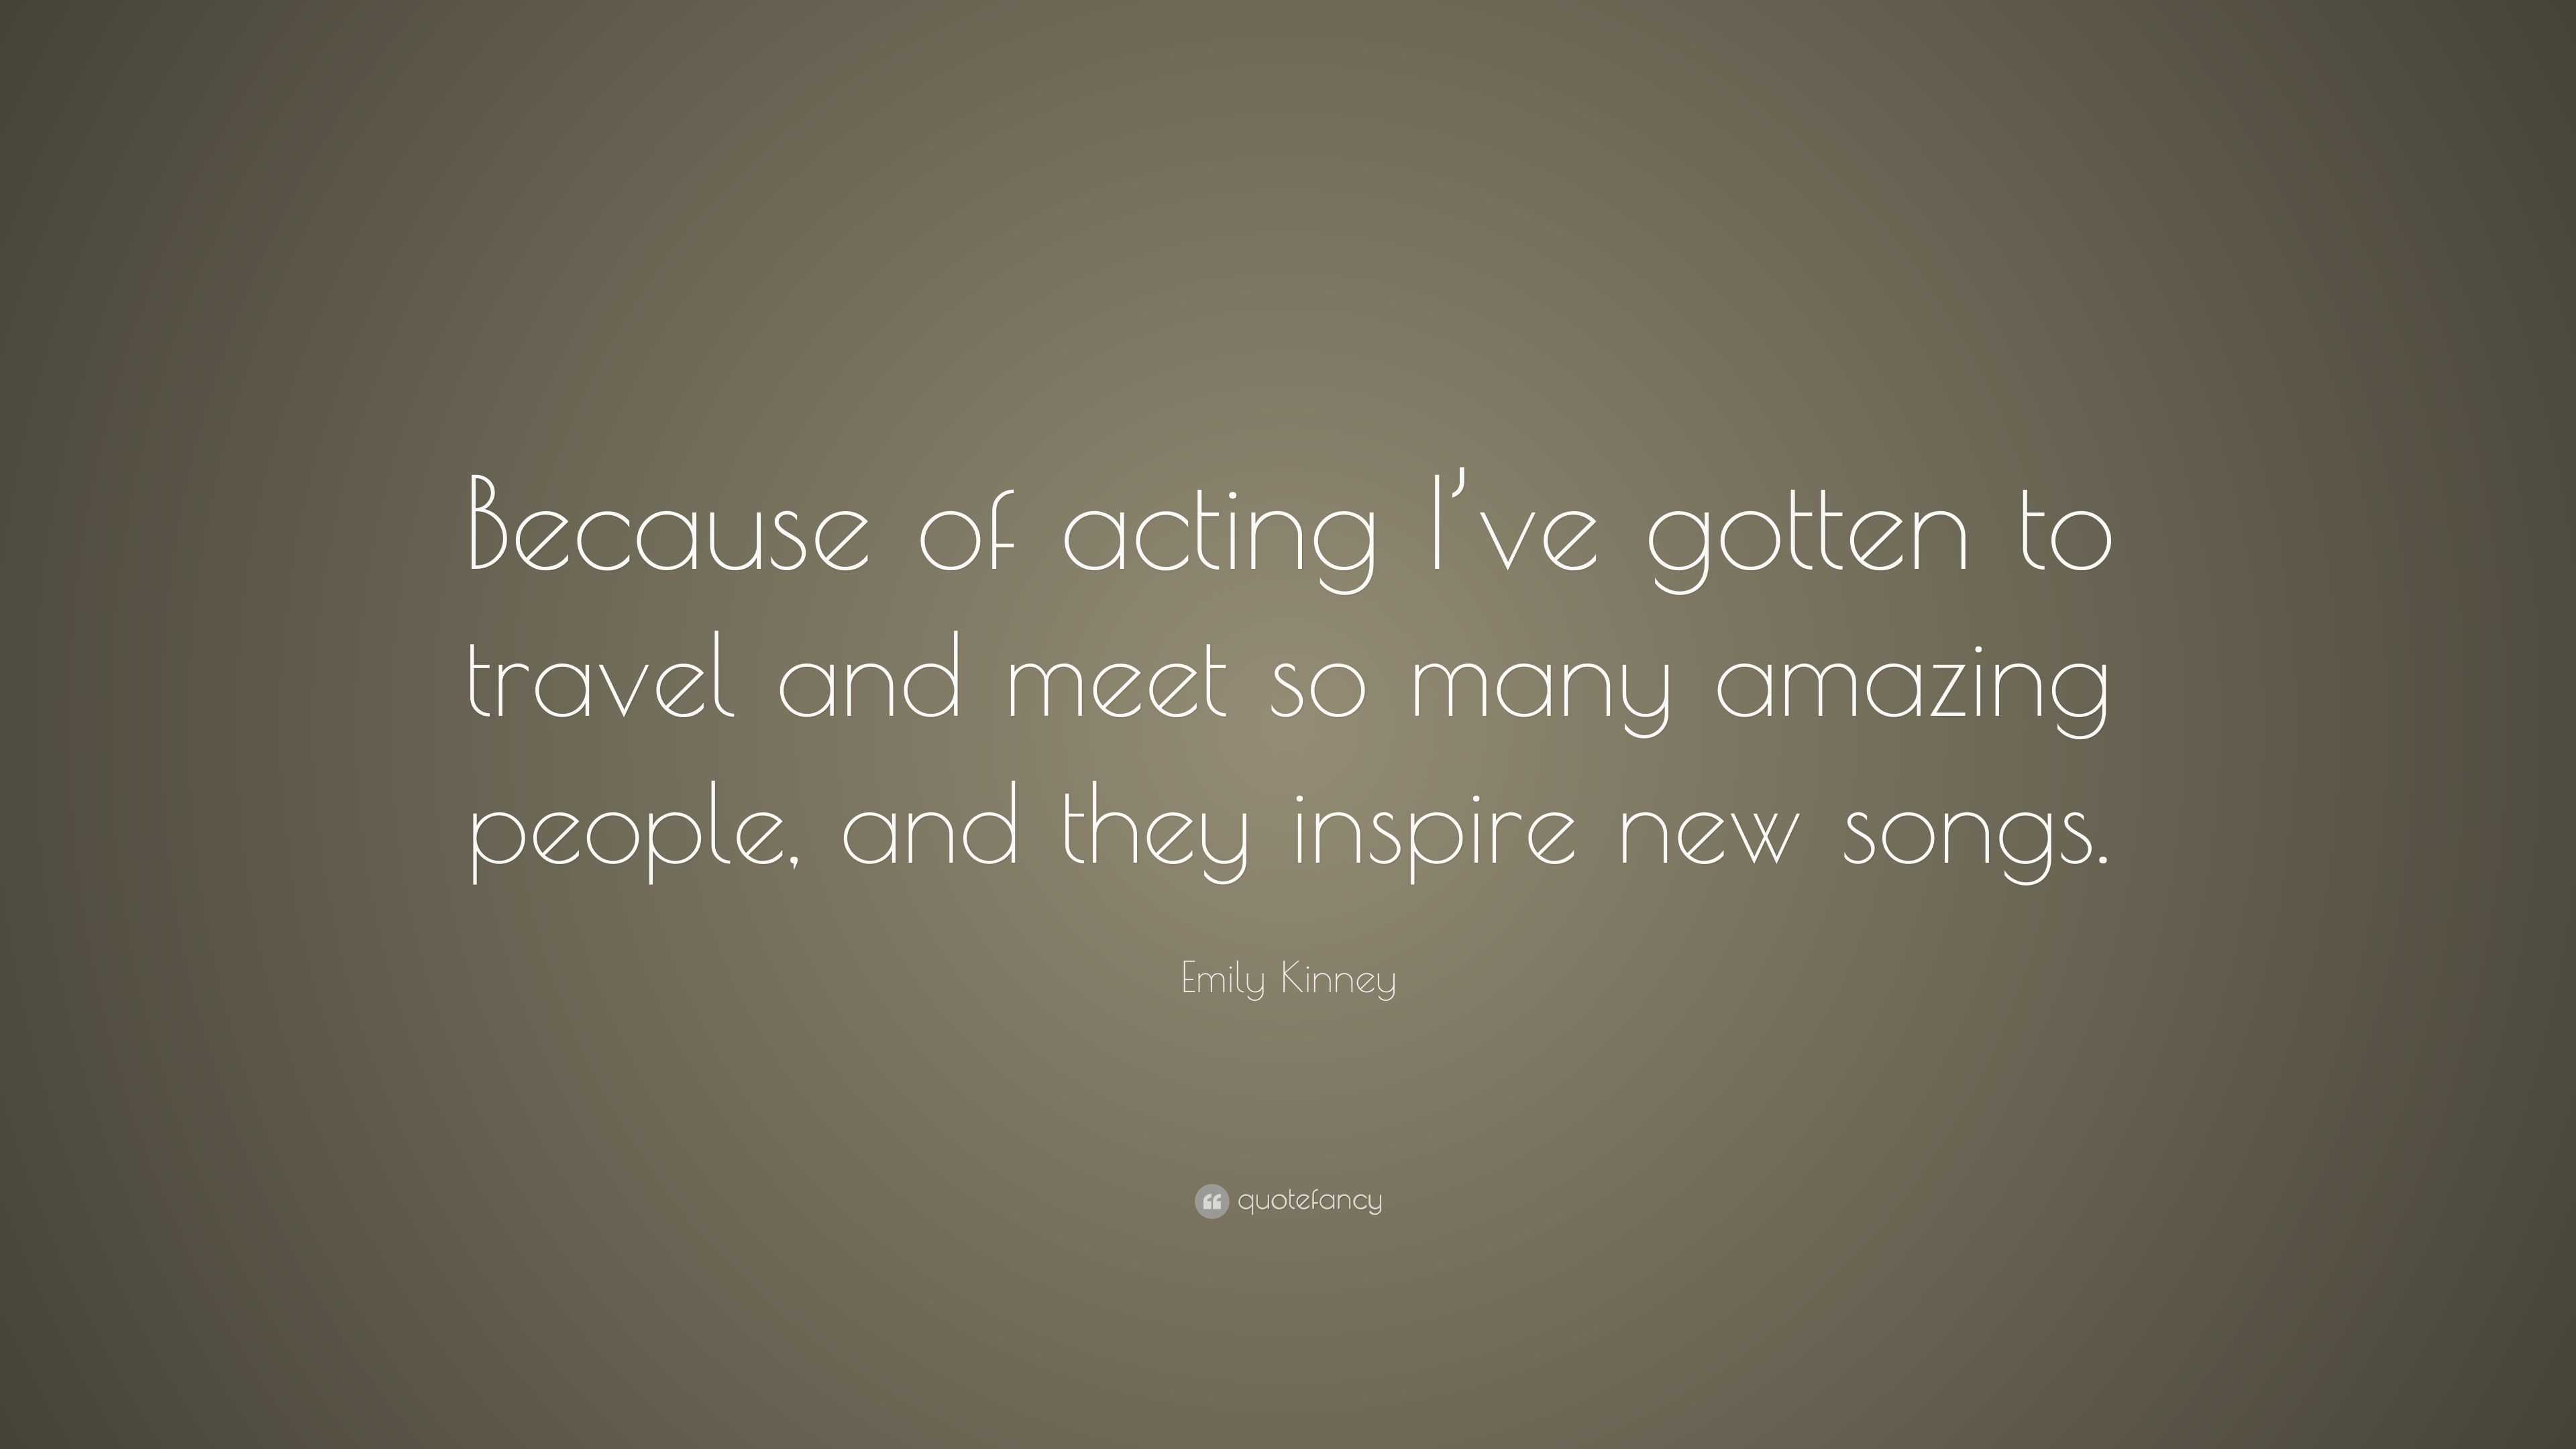 Emily Kinney Quote: “Because of acting I’ve gotten to travel and meet ...